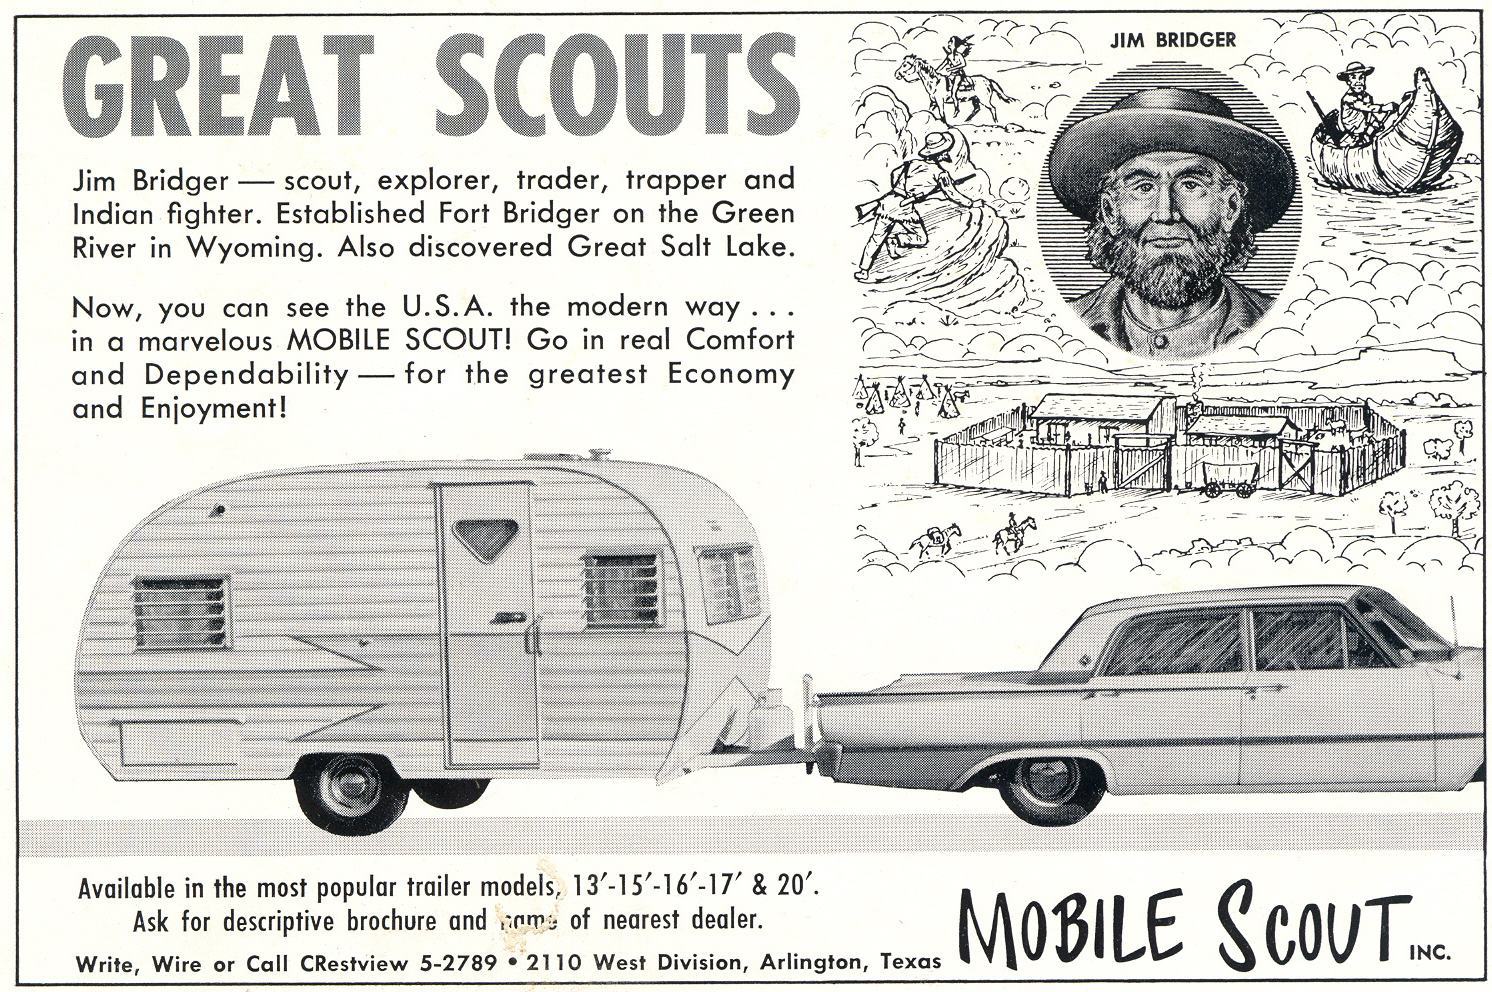 Mobile Scout ad campaign 2 Great Scouts % [fixed]